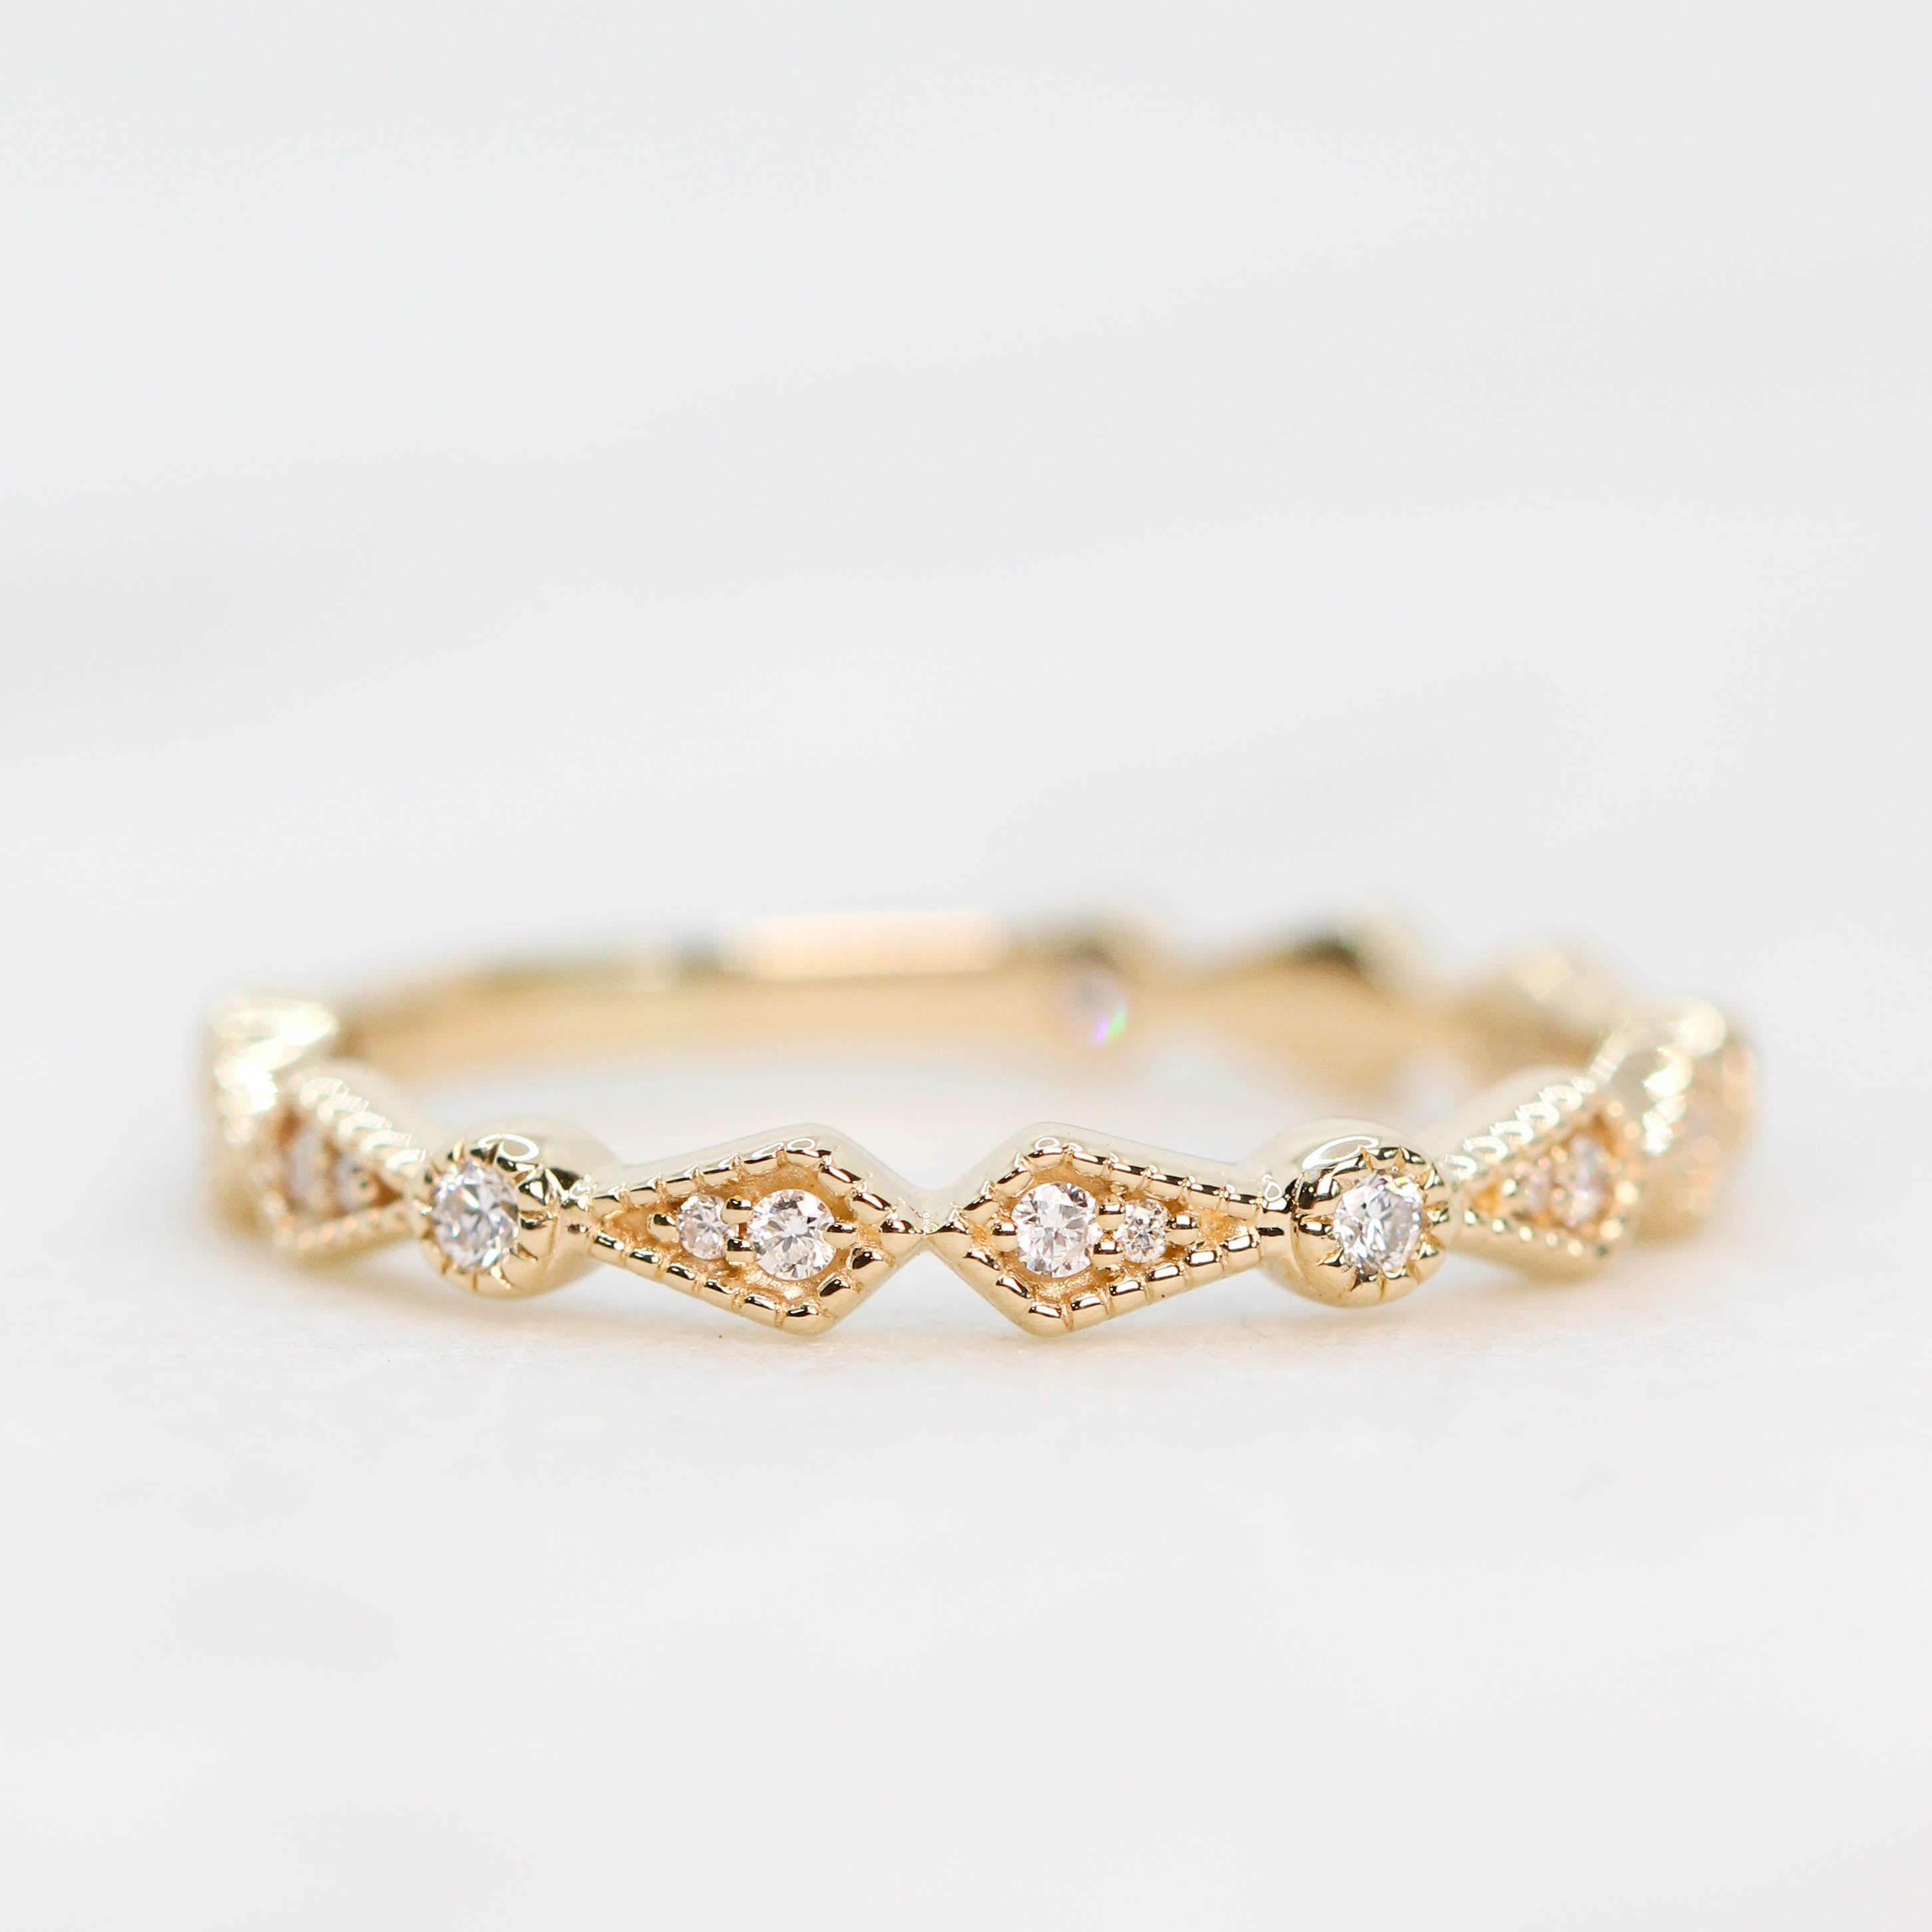 Evelyn - Stackable Wedding Band in Your Choice of Gold - Midwinter Co. Alternative Bridal Rings and Modern Fine Jewelry